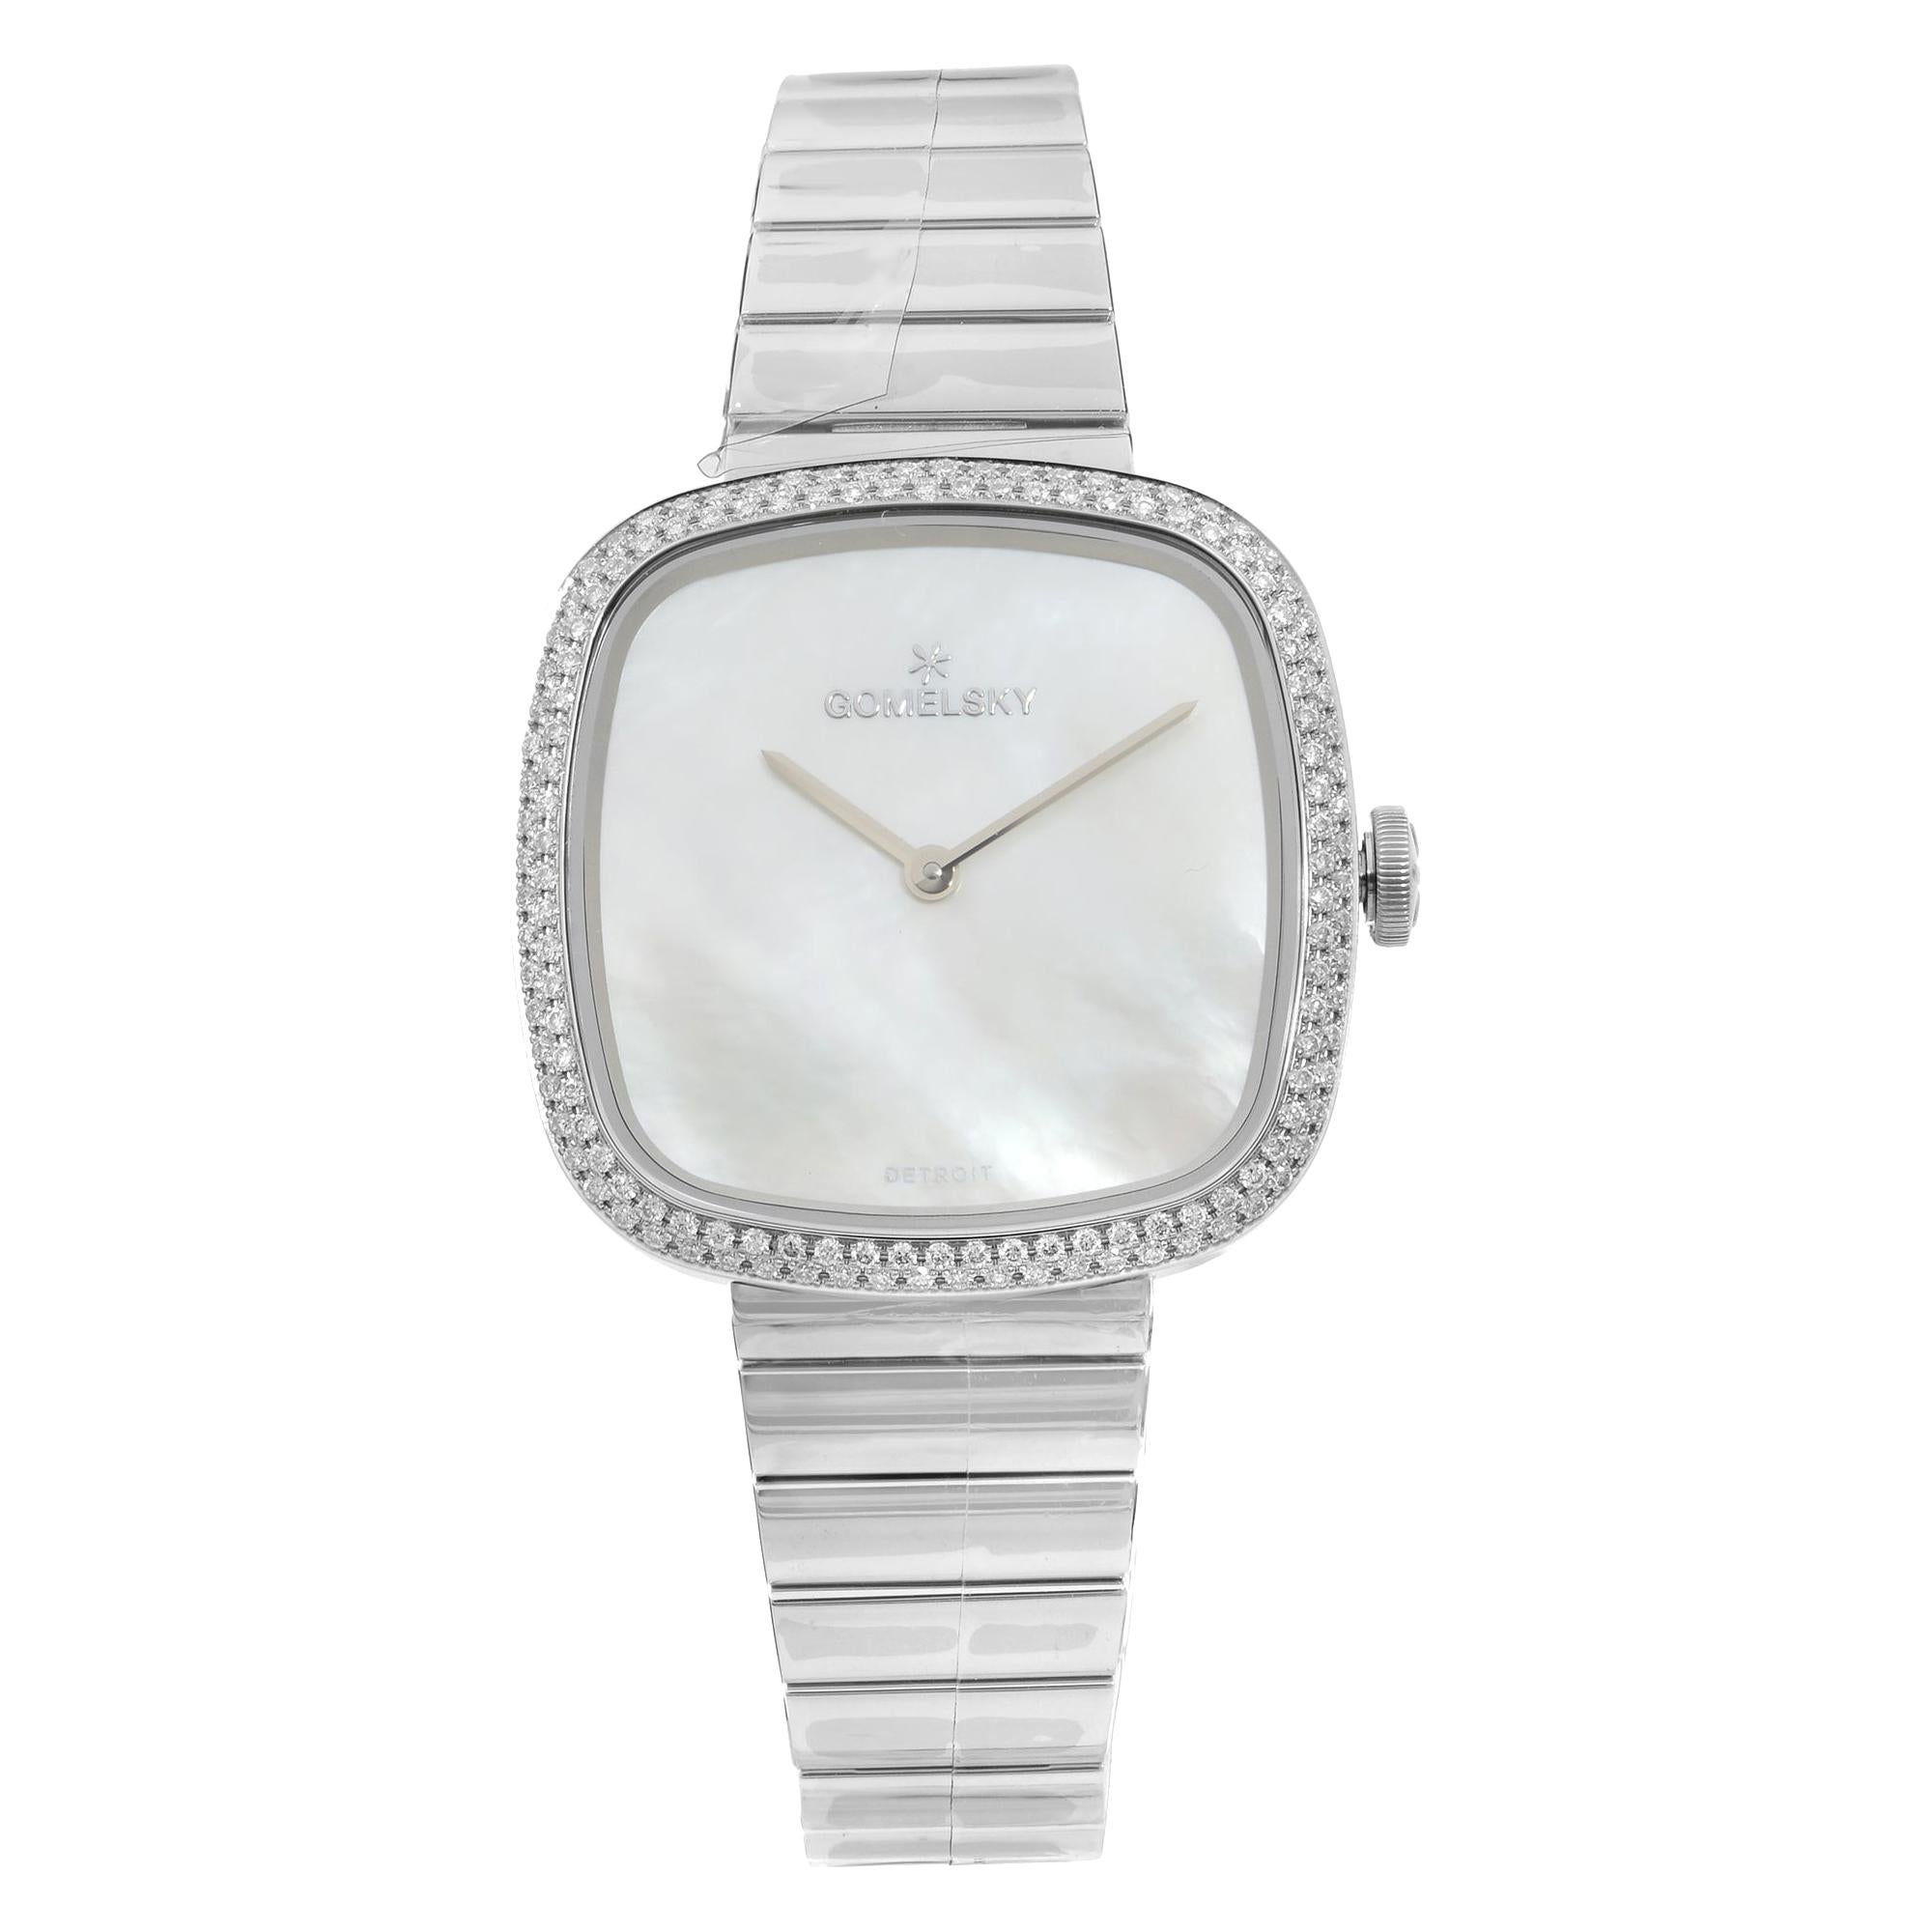 Gomelsky Eppie Sneed Stainless Steel Diamond White Dial Ladies Watch G0120095028 For Sale